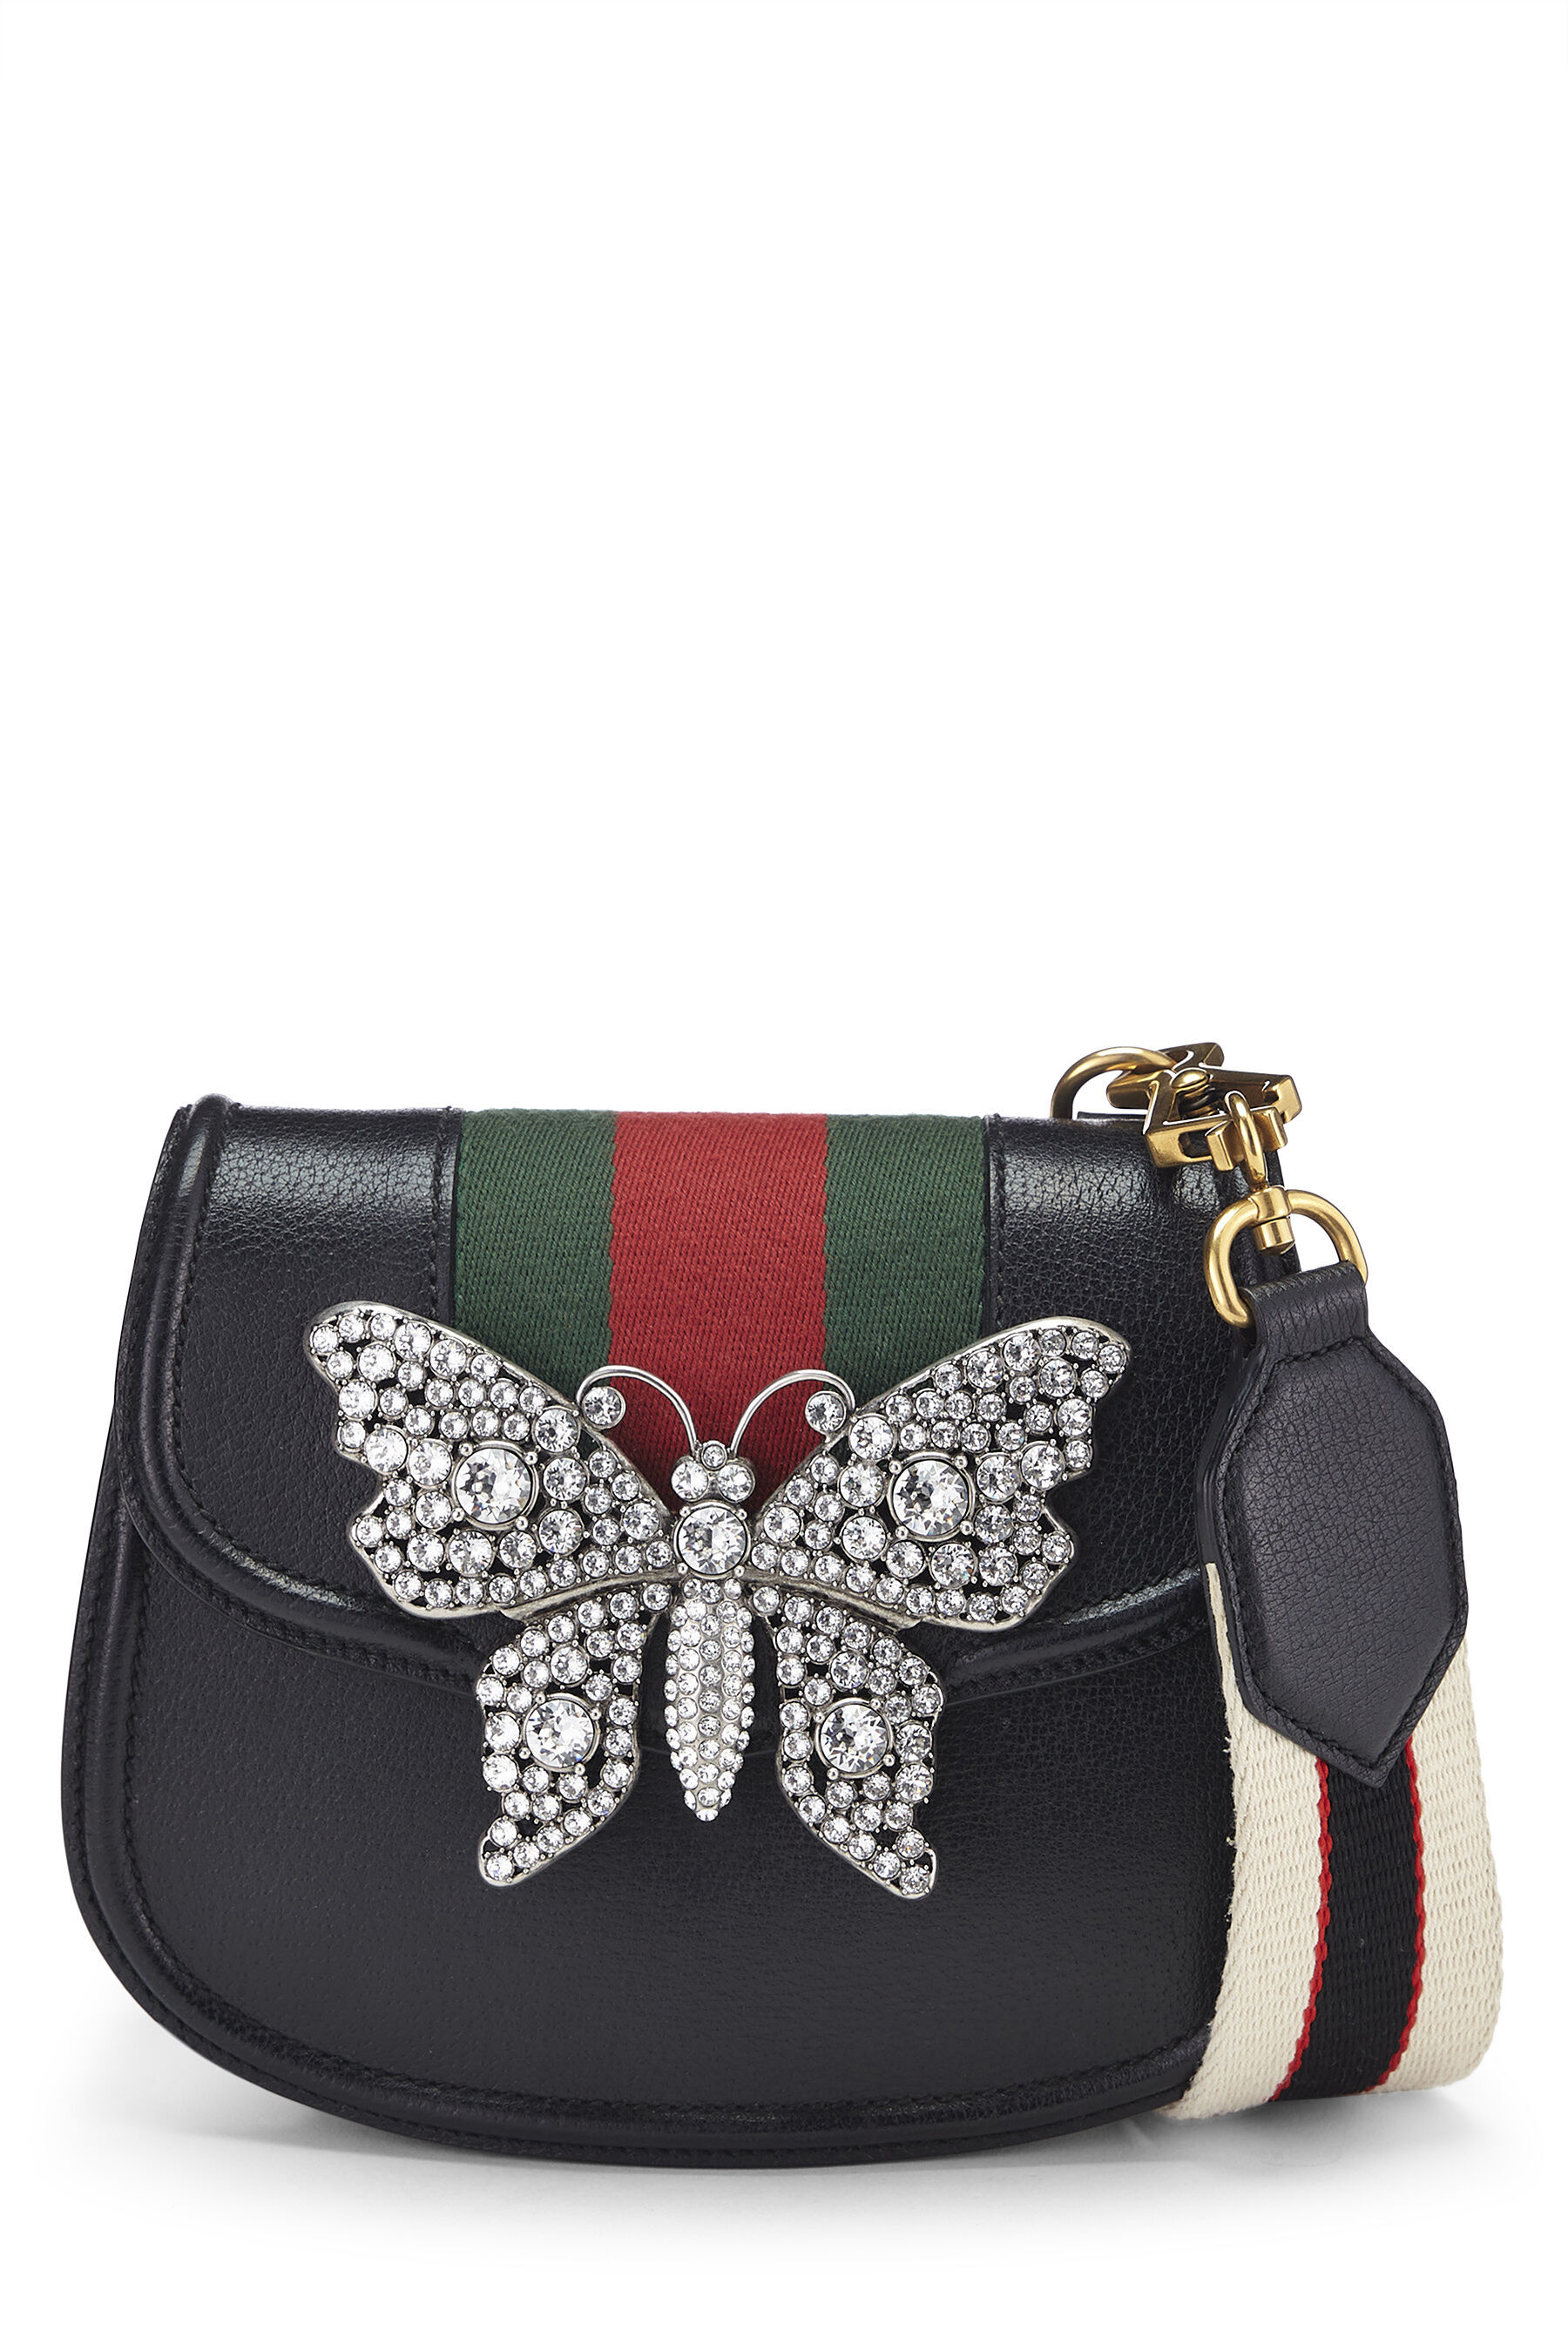 Gucci Blondie small shoulder bag in black leather | GUCCI® US